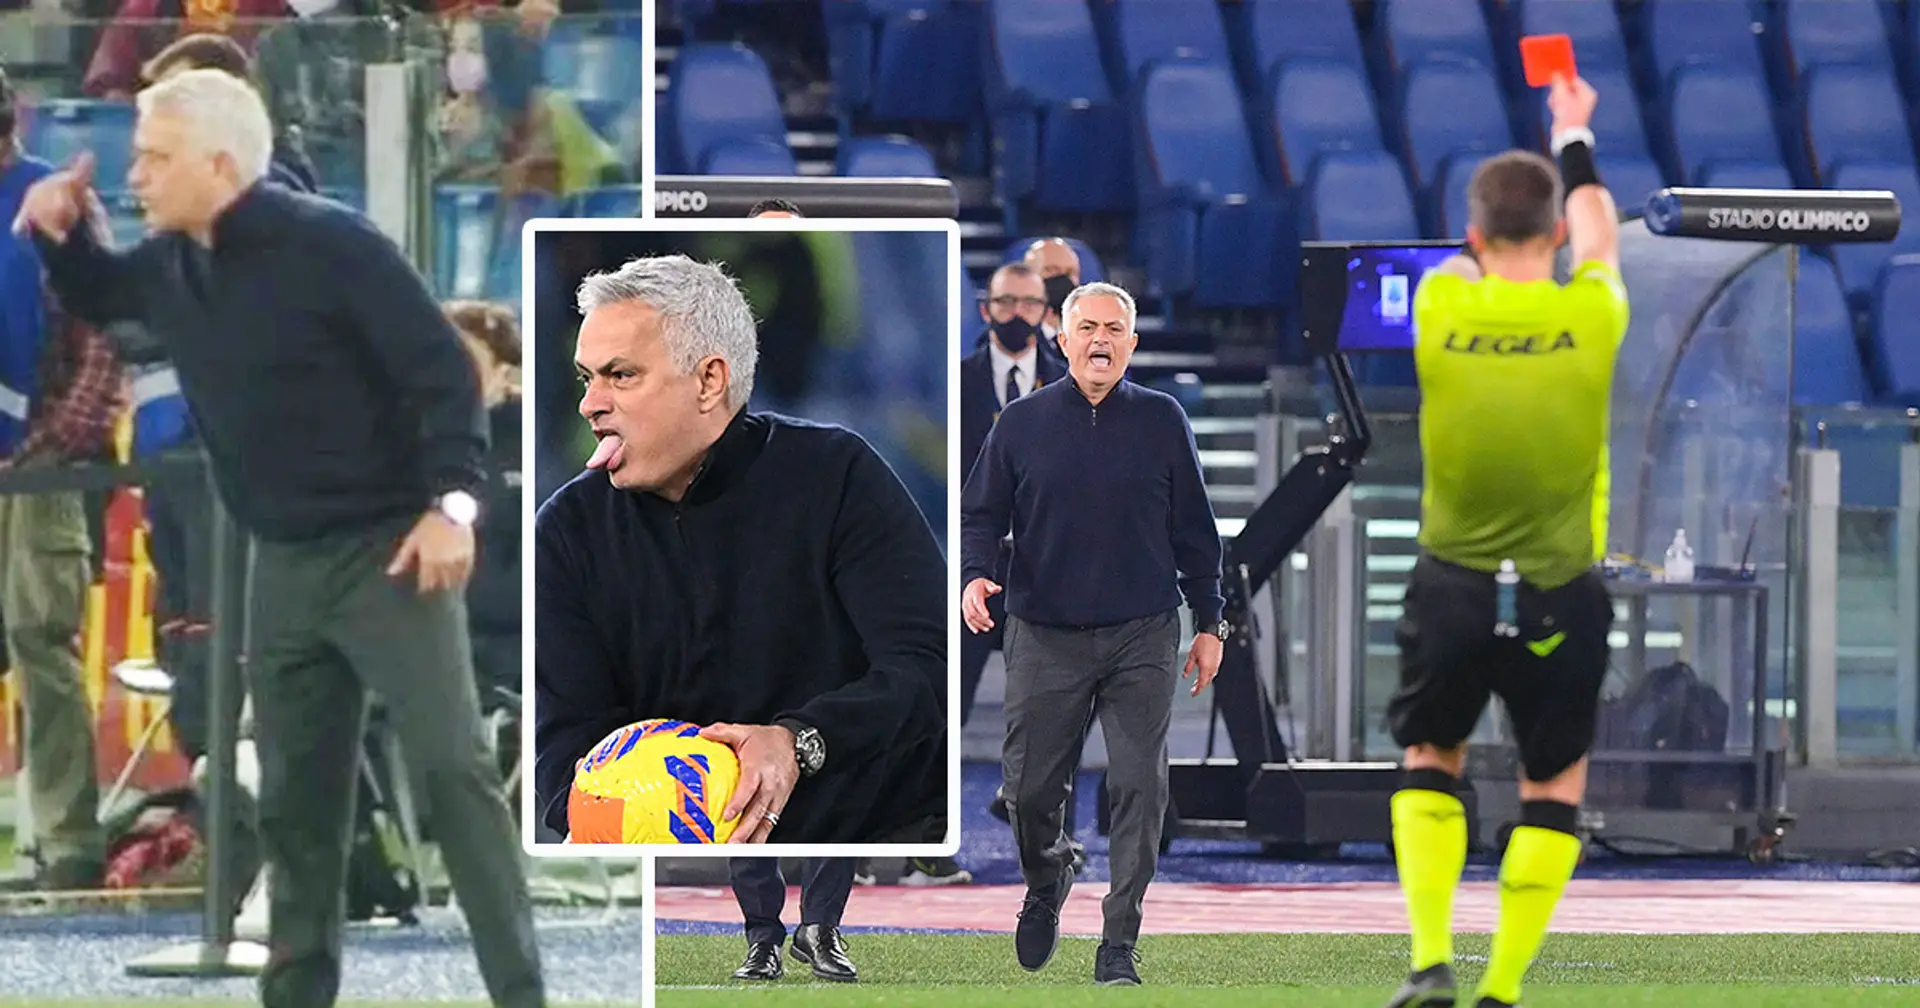 Jose Mourinho faces 3 match ban after allegedly telling referee 'Juventus sent you'